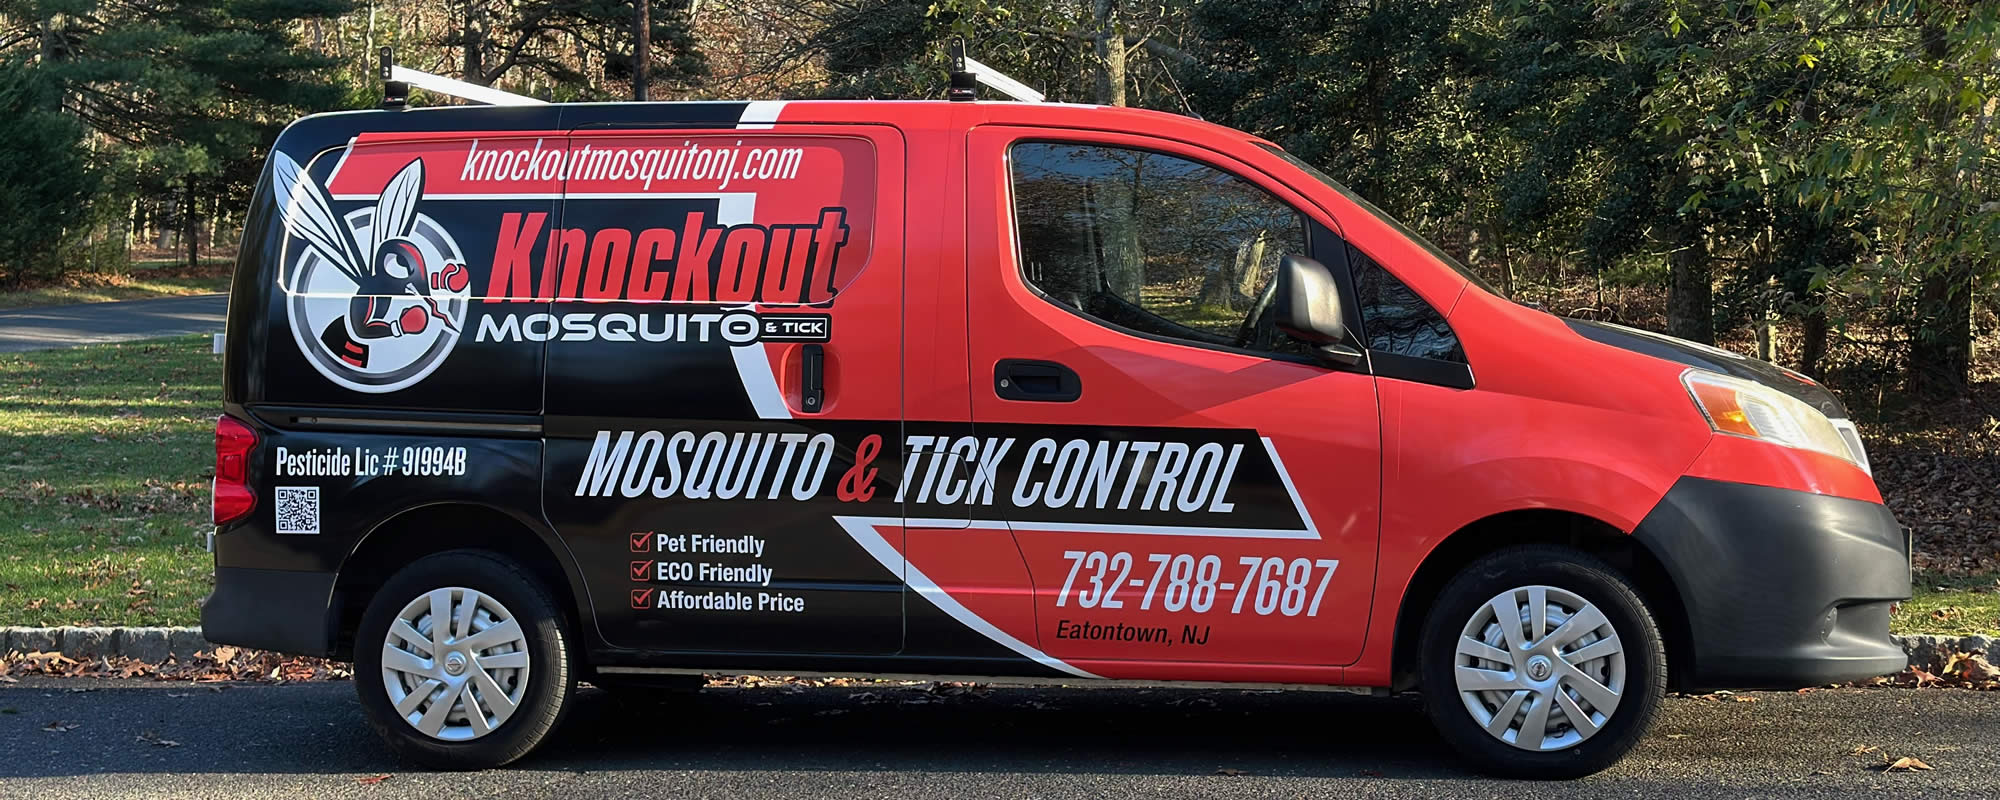 Asbury Park Mosquito Control Services